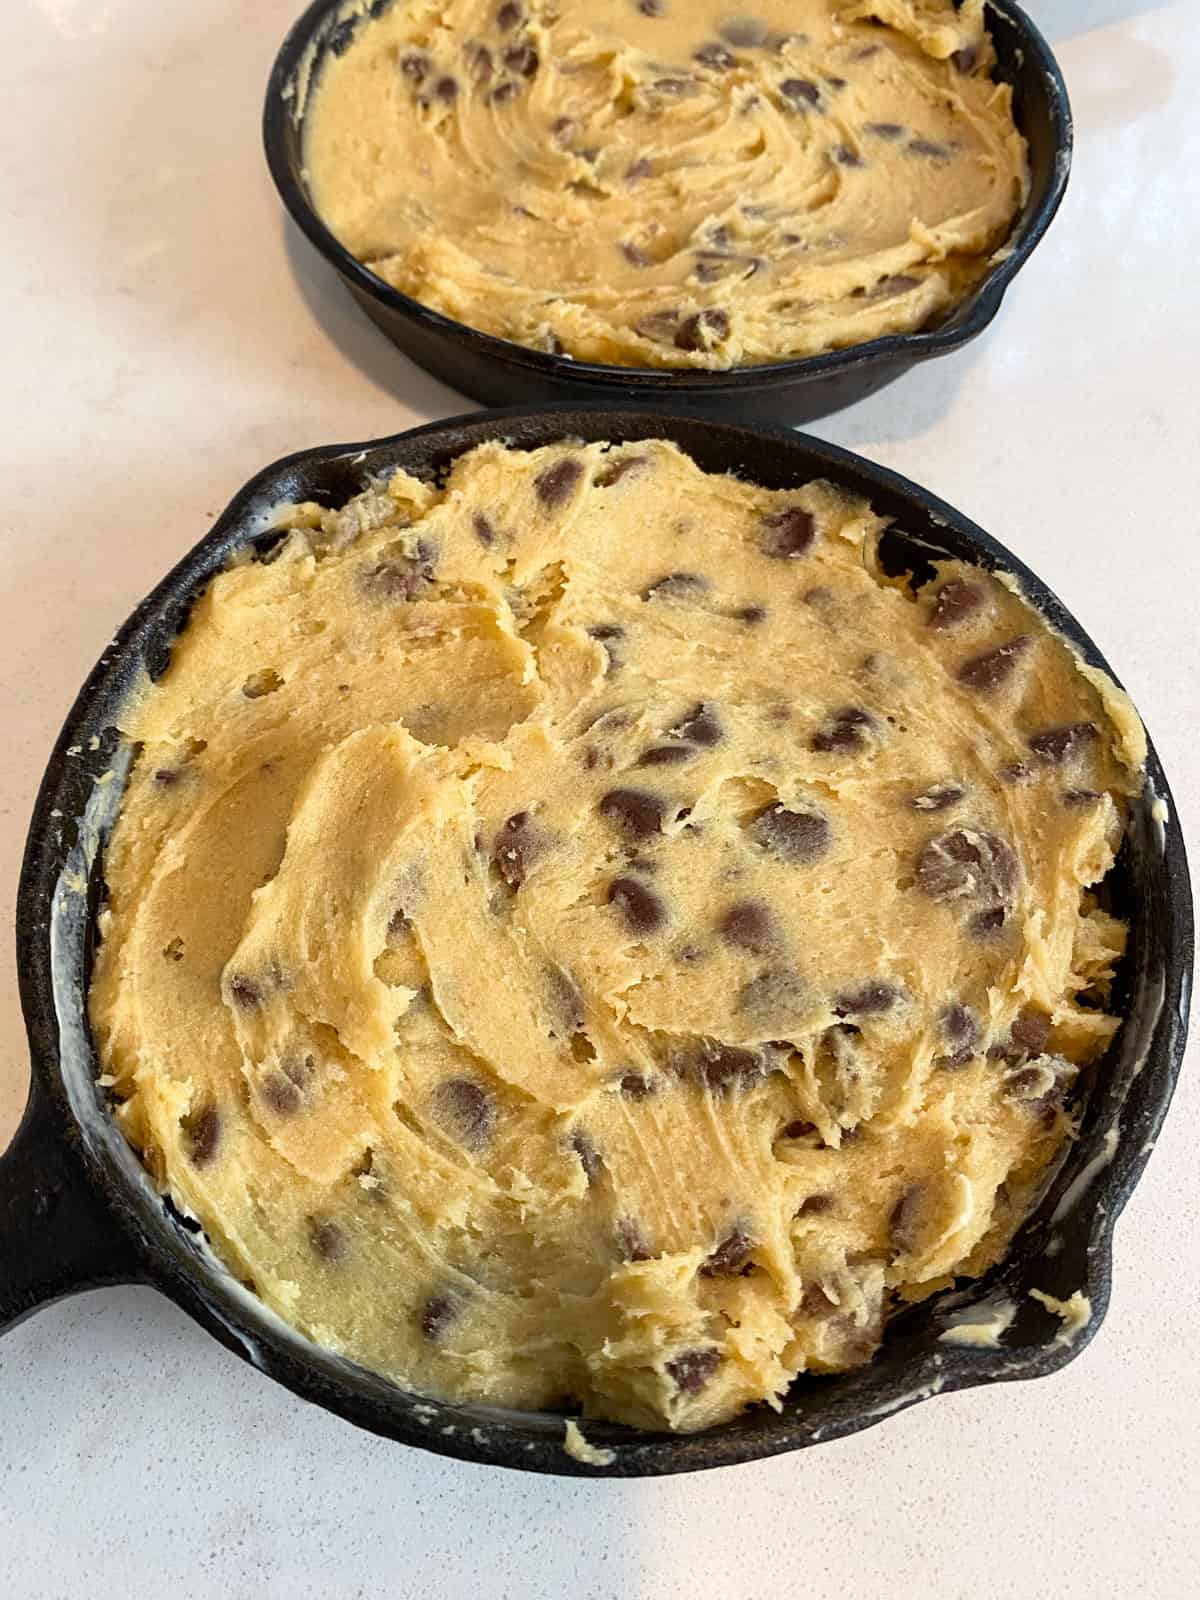 Divide the cookie dough between the two small cast iron skillets and spread the dough evenly into the skillet.